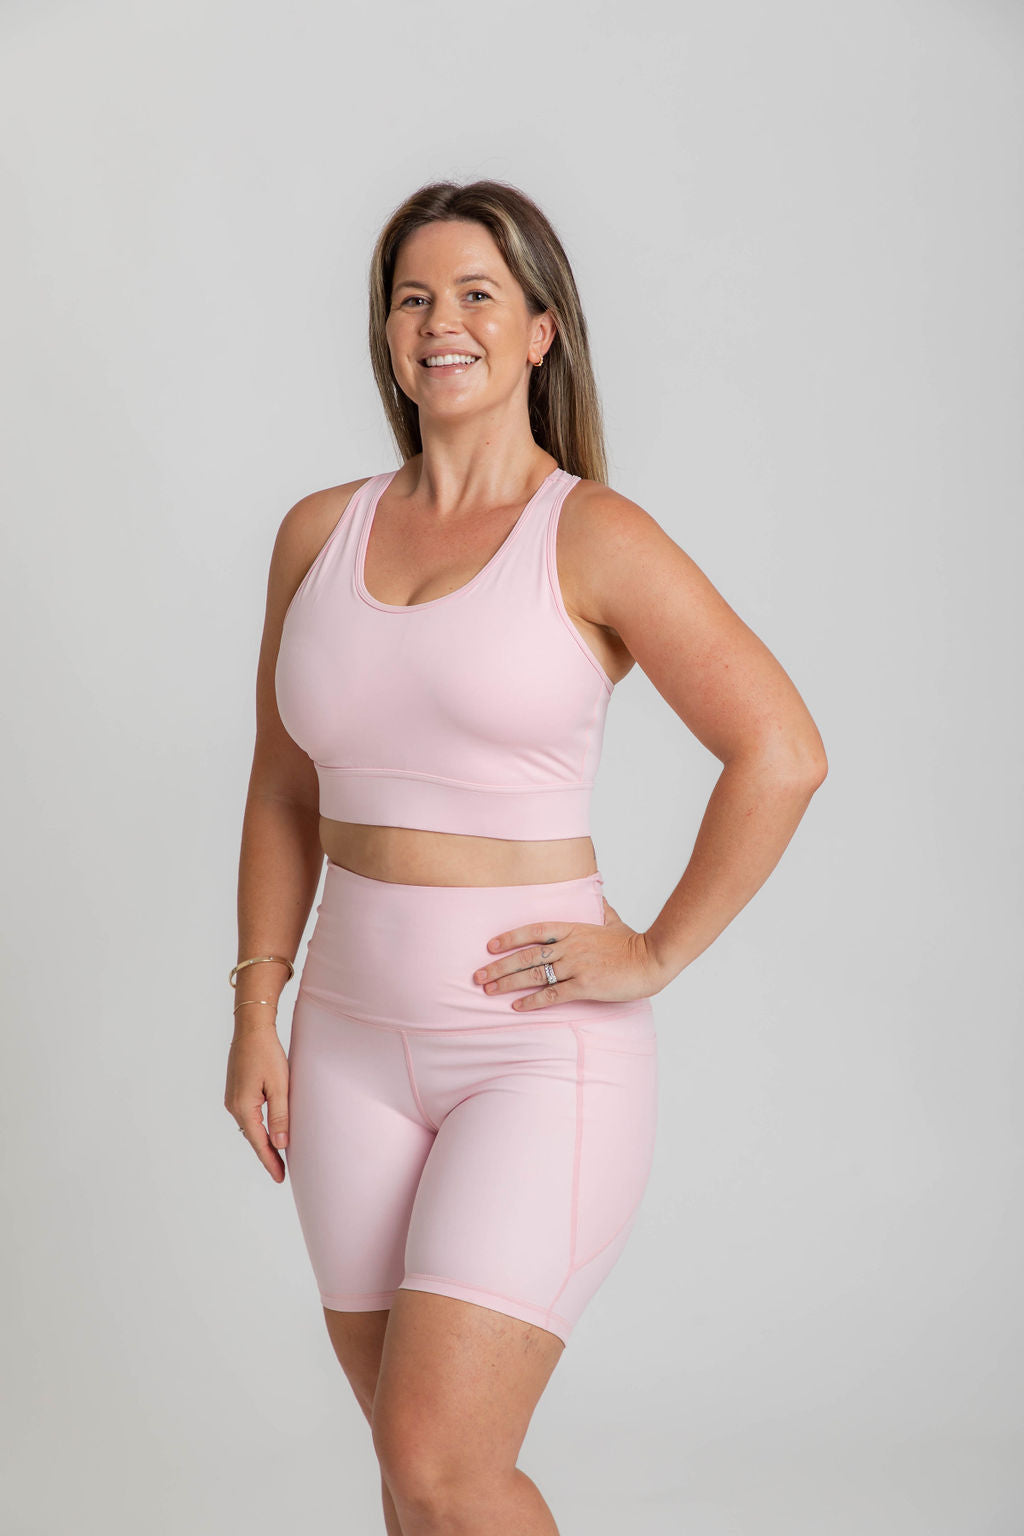 BEYOND SPORTS BRA - "THE ULTIMATE" MAXIMUM SUPPORT + MAX COVERAGE - BABY PINK